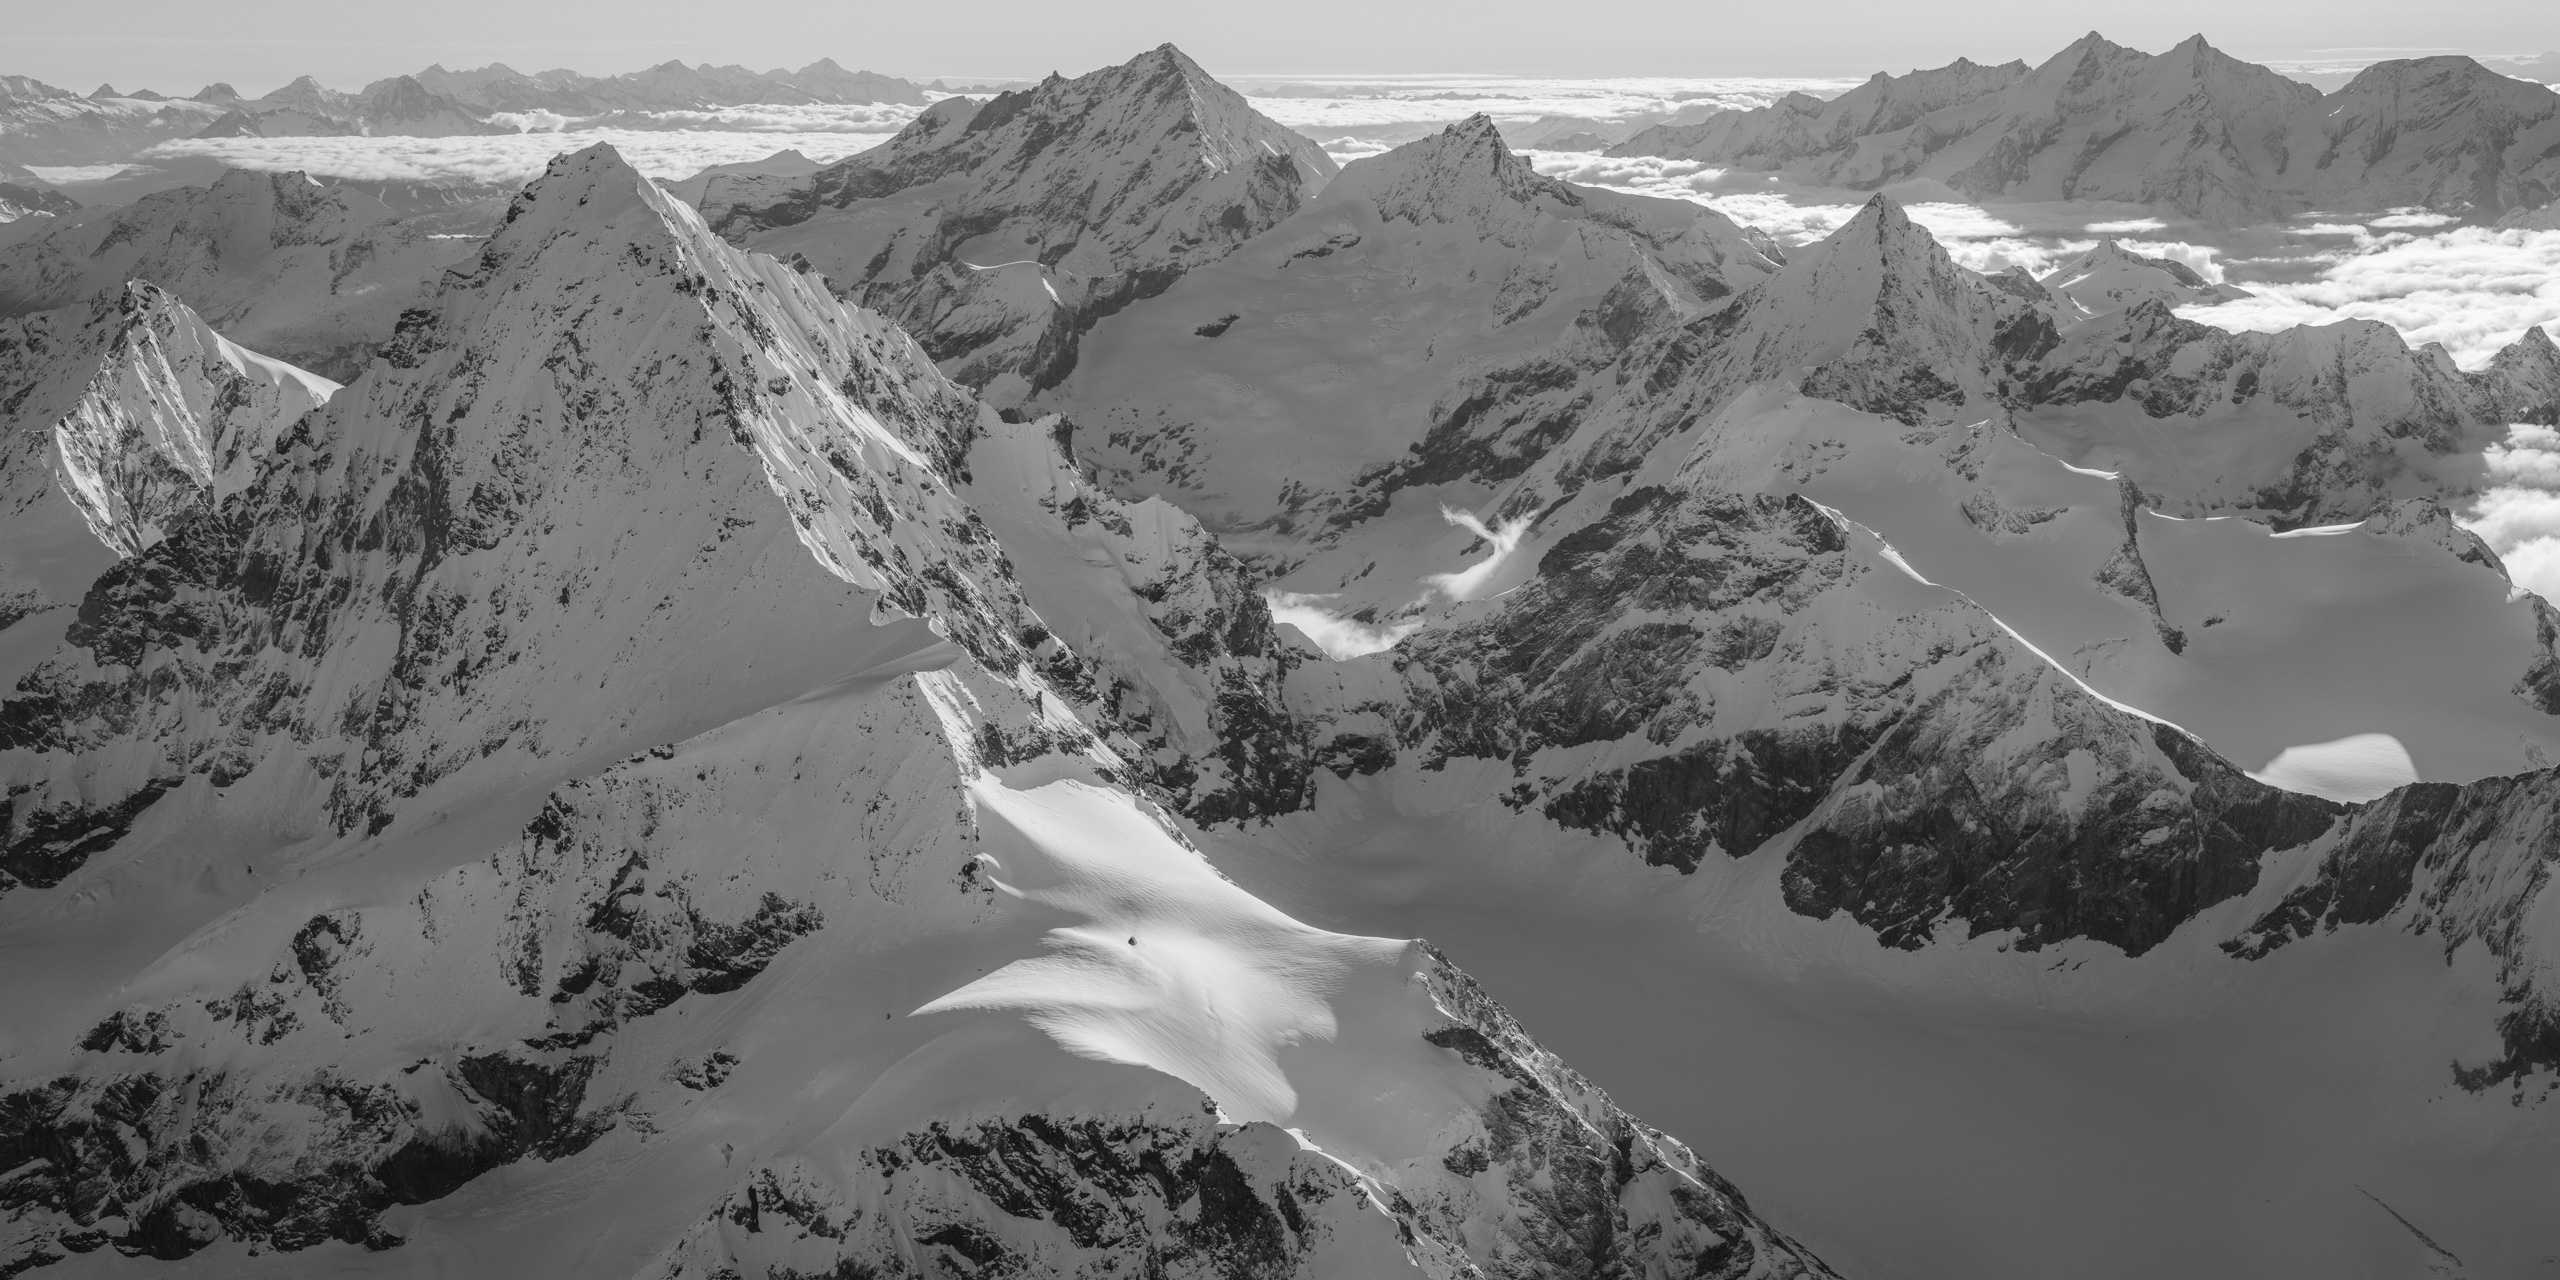 Black and white panoramic poster of the mountains of the Valais Alps - Val d'Hérens, Val d'Anniviers, Zermatt and Saas Fee